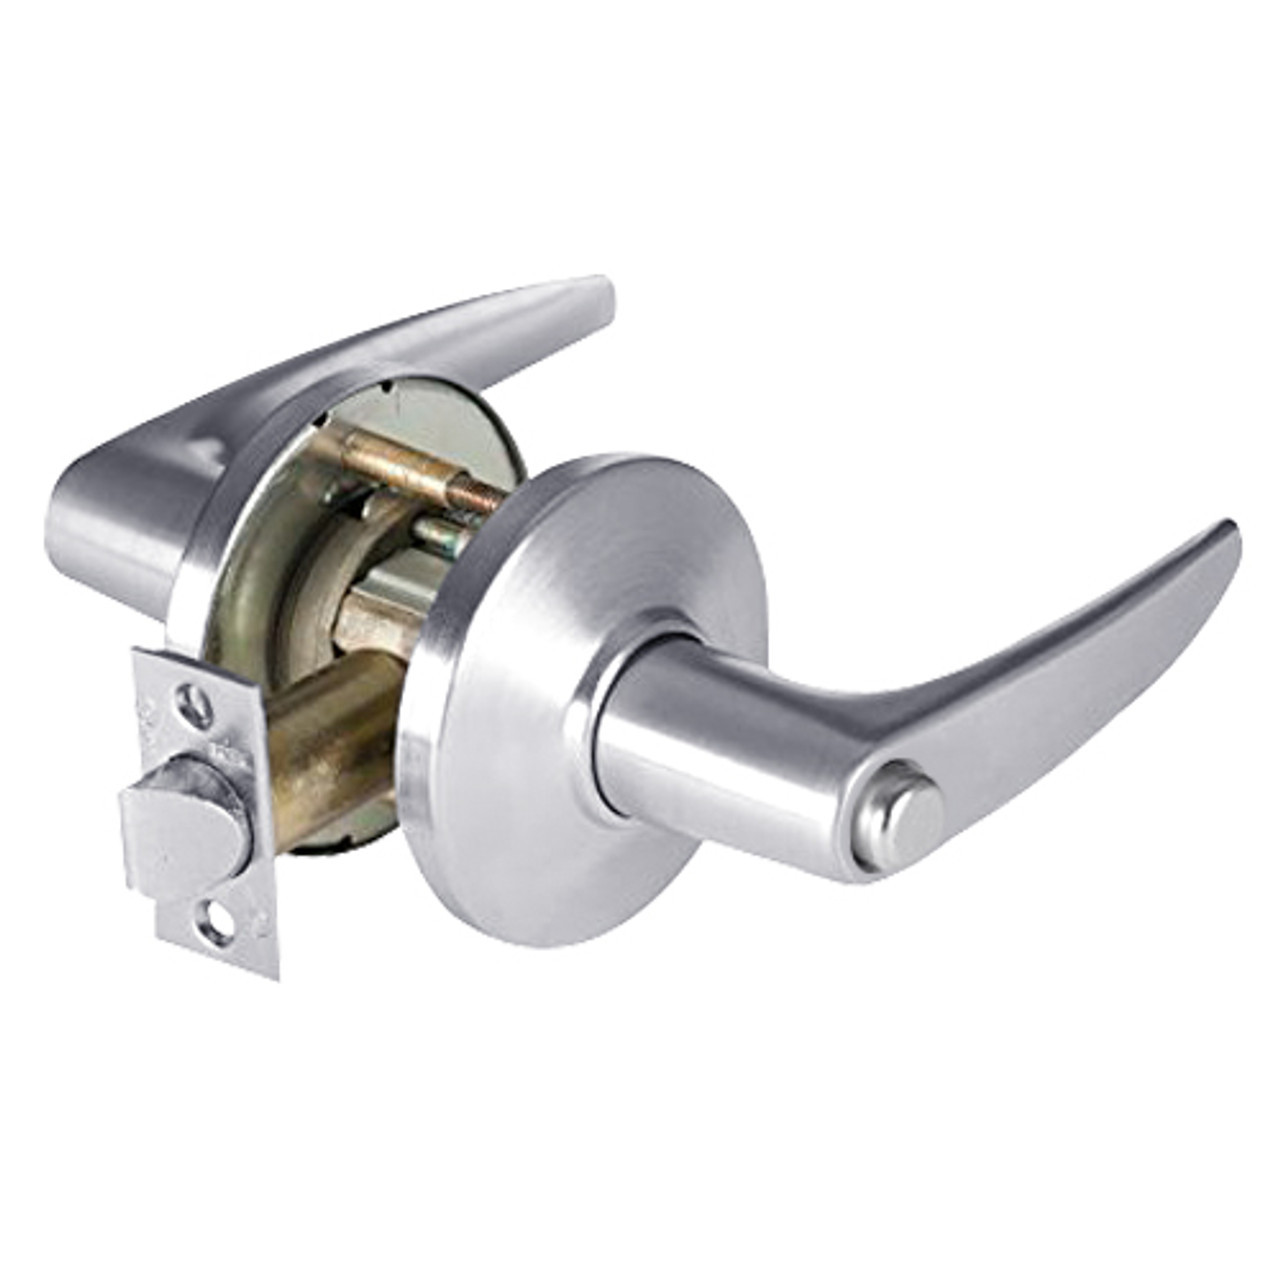 9K30L16DSTK625LM Best 9K Series Privacy Heavy Duty Cylindrical Lever Locks with Curved Without Return Lever Design in Bright Chrome